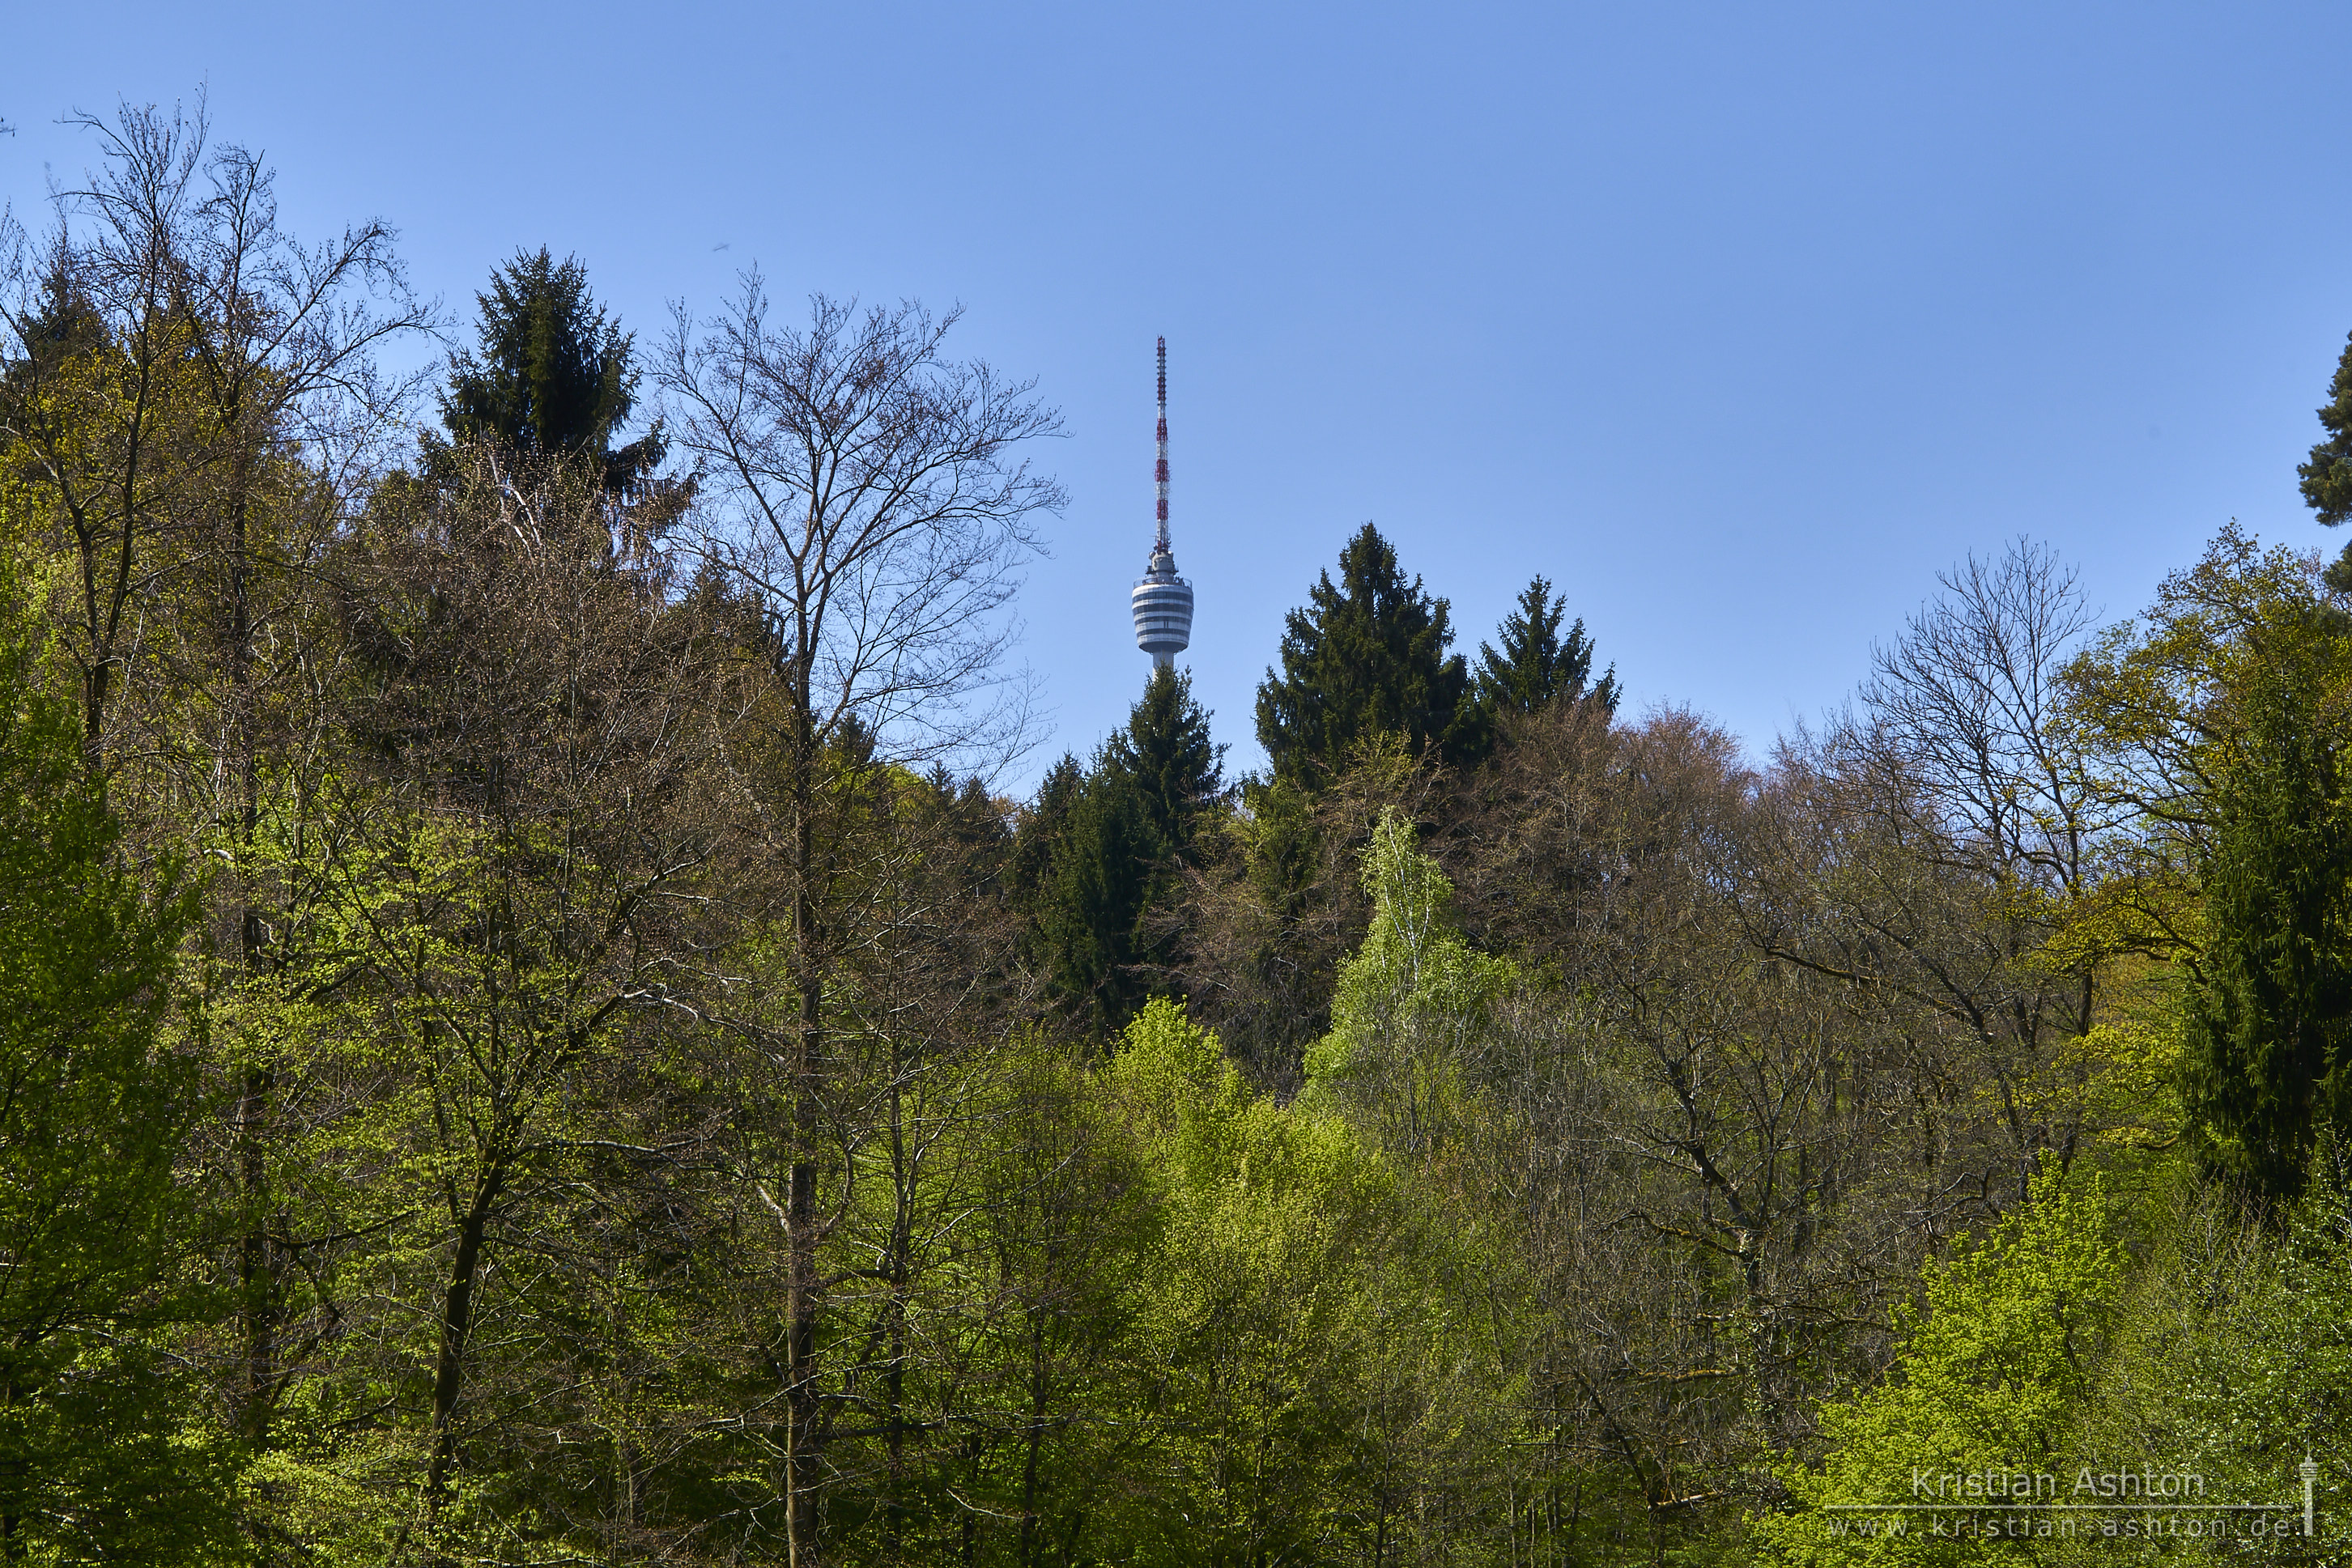 The television tower viewed from the Tiefenbachsee lake